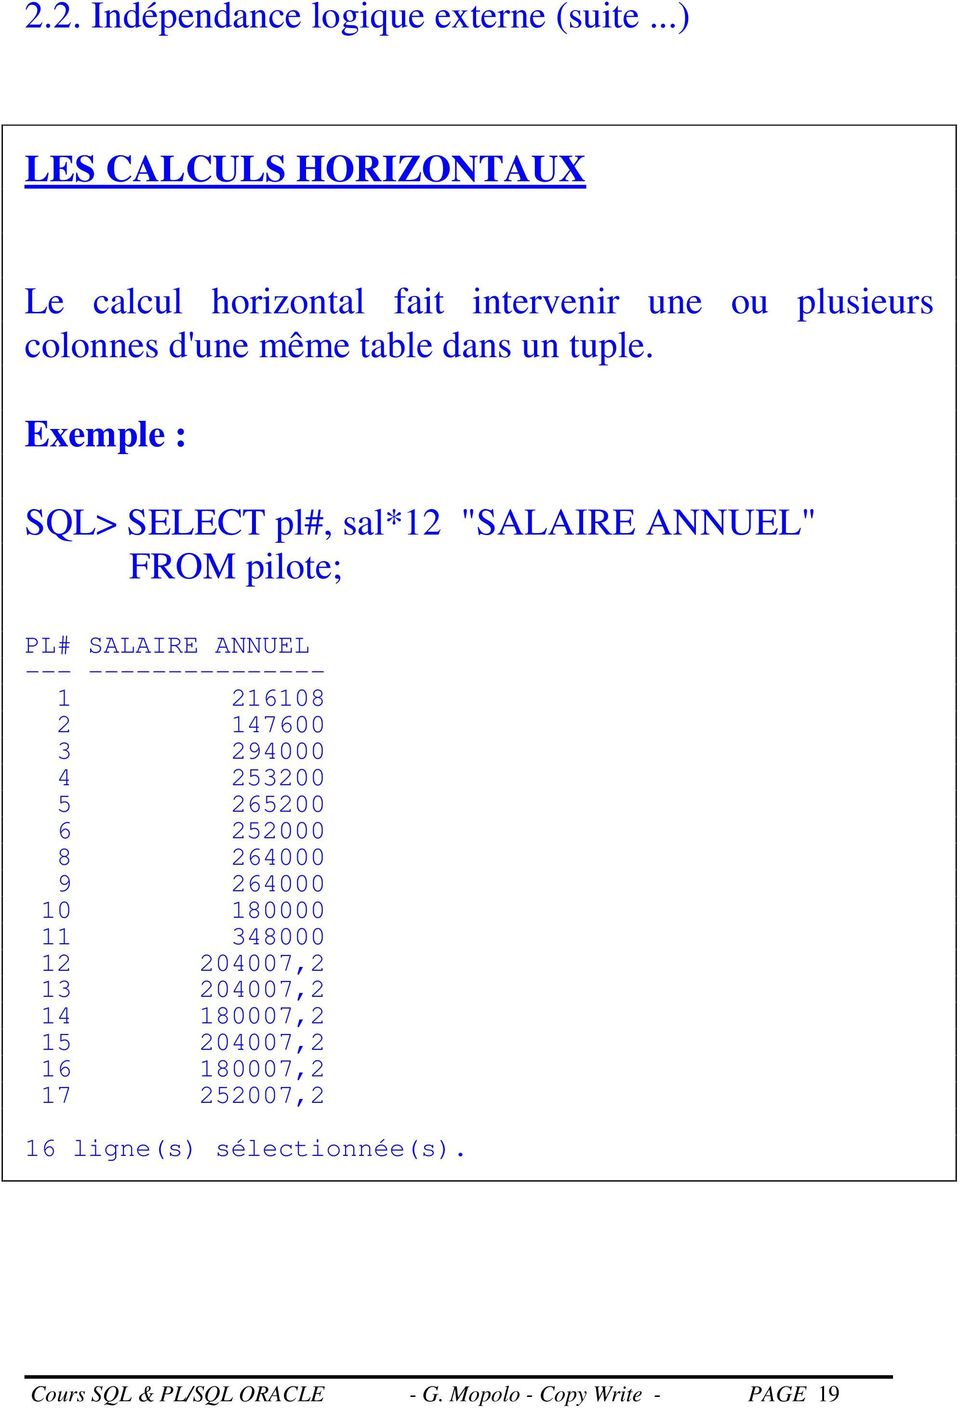 Exemple : SQL> SELECT pl#, sal*12 "SALAIRE ANNUEL" FROM pilote; PL# SALAIRE ANNUEL --- --------------- 1 216108 2 147600 3 294000